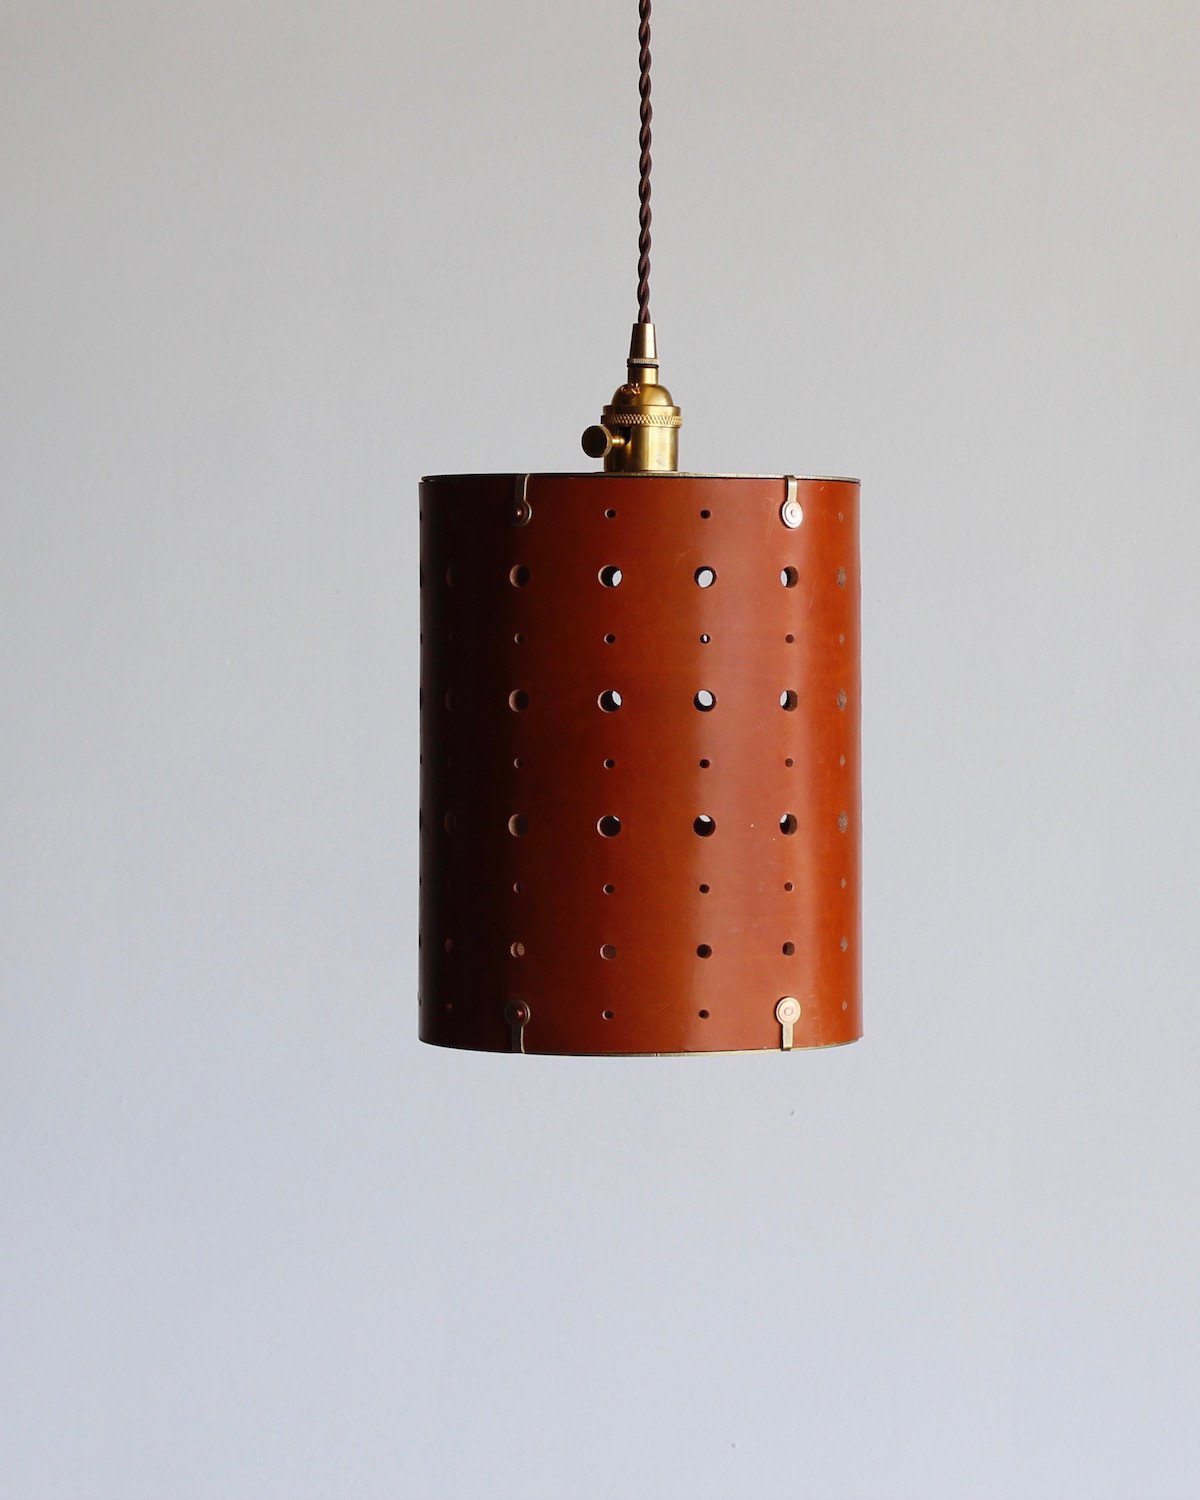 Tan leather cylinder pendant with handstitched, perforated leather shade. Made by Lostine in Philadelphia. Hardwired or plug light fixture. Simple interior design, made in the USA.